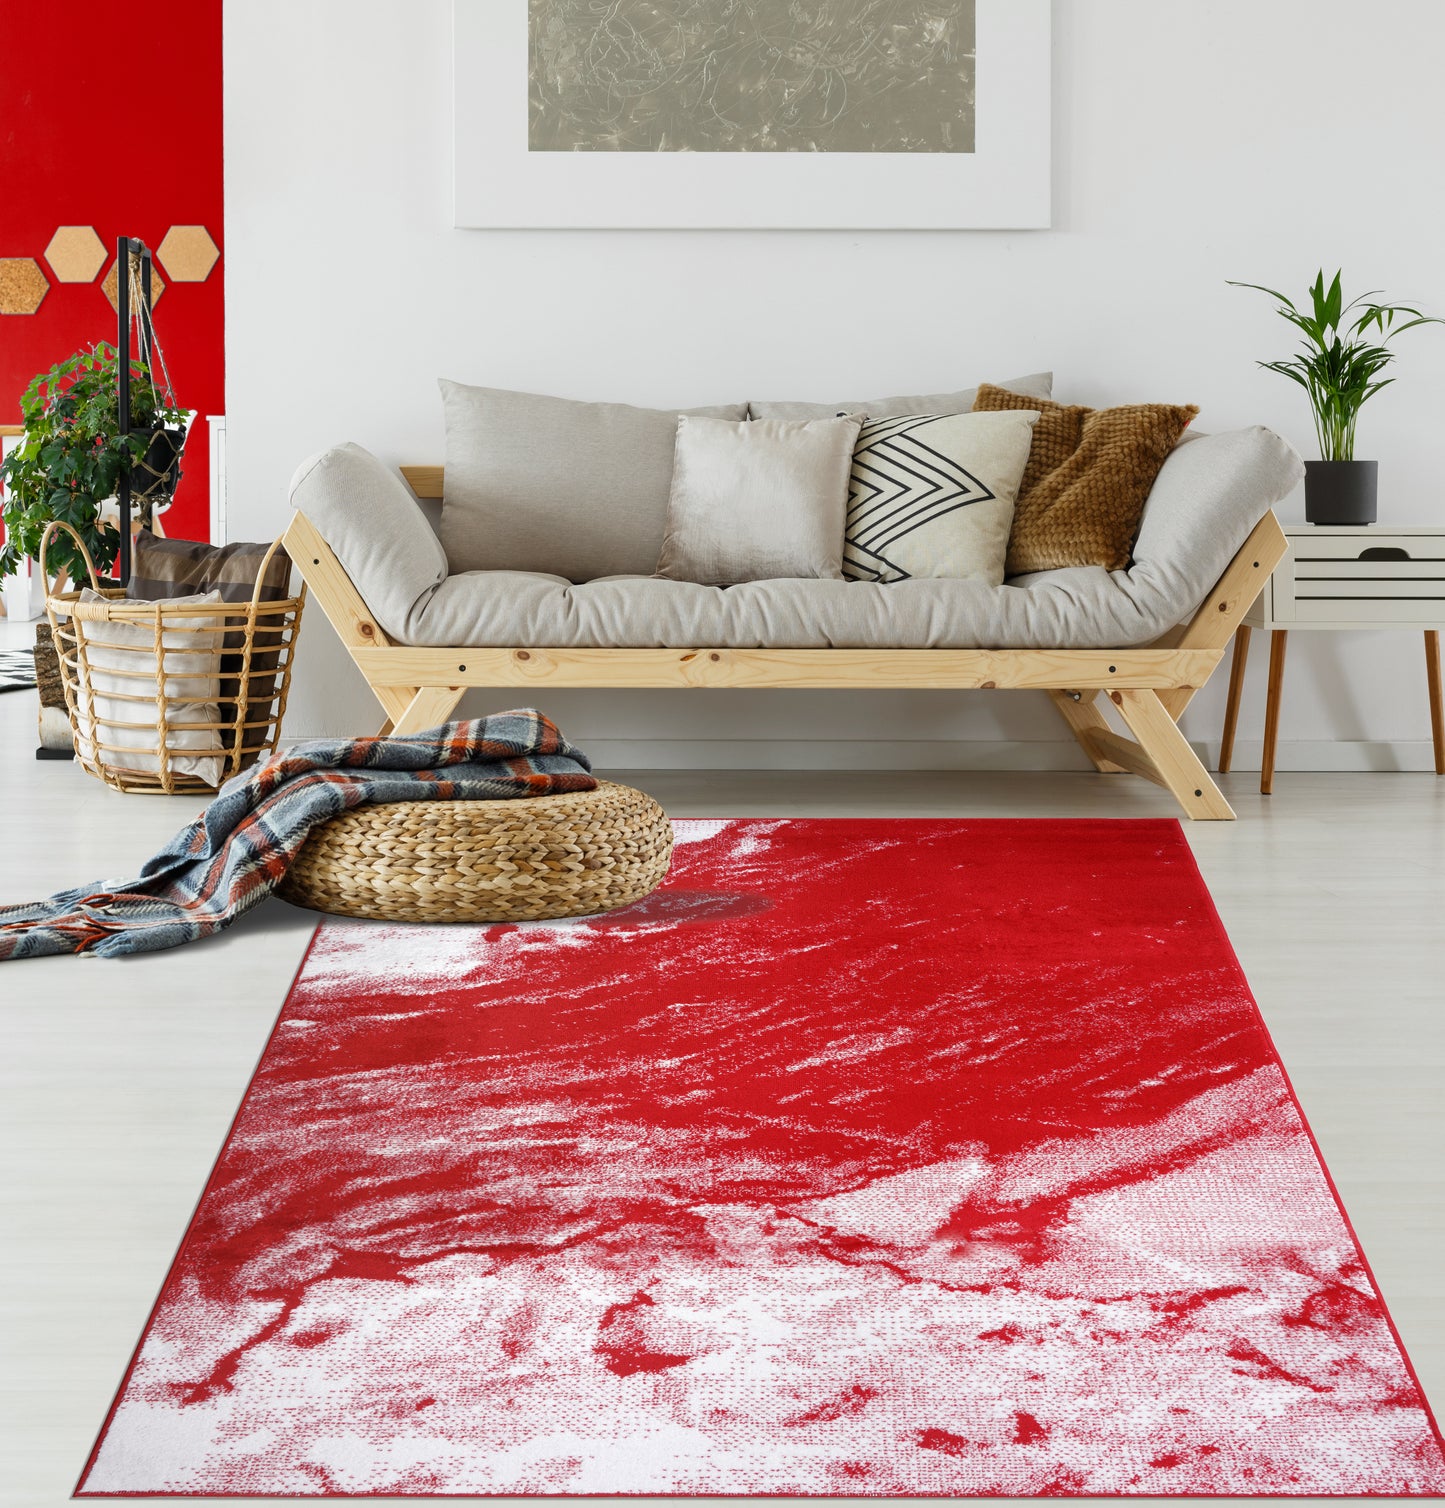 calvin red black abstract area rug 2x8, 3x10, 2x10 ft Long Runner Rug, Hallway, Balcony, Entry Way, Kitchen, Stairs